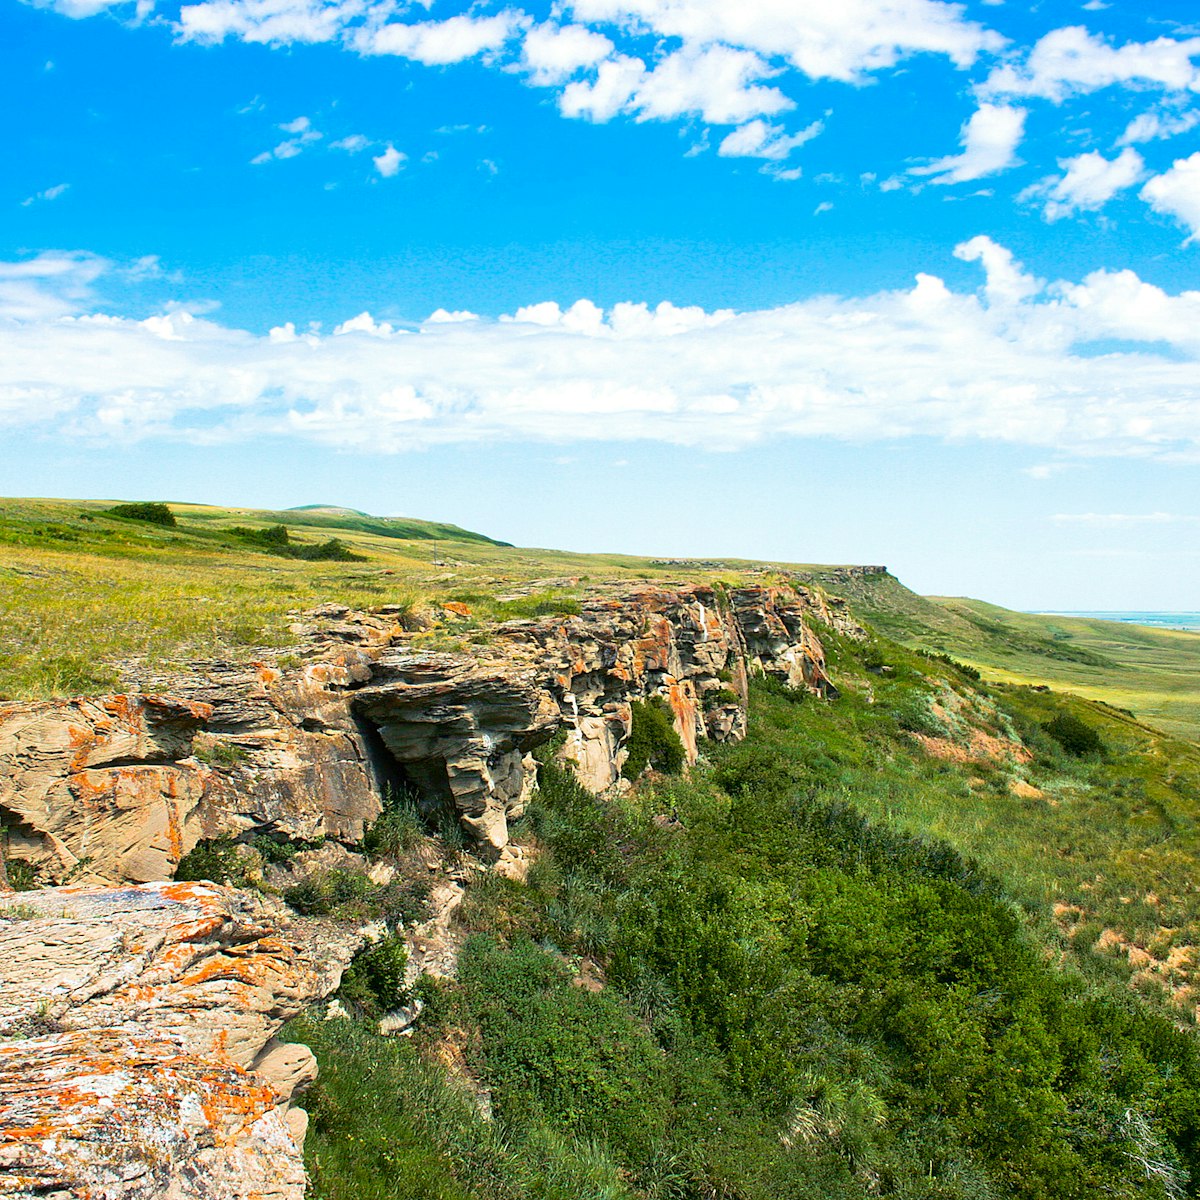 Canadian Prairie at Head-Smashed-In Buffalo Jump world heritage site in Southern Alberta, Canada; Shutterstock ID 97797887; full: 65050; gl: 65050; netsuite: poi; your: Barbara Di Castro
97797887